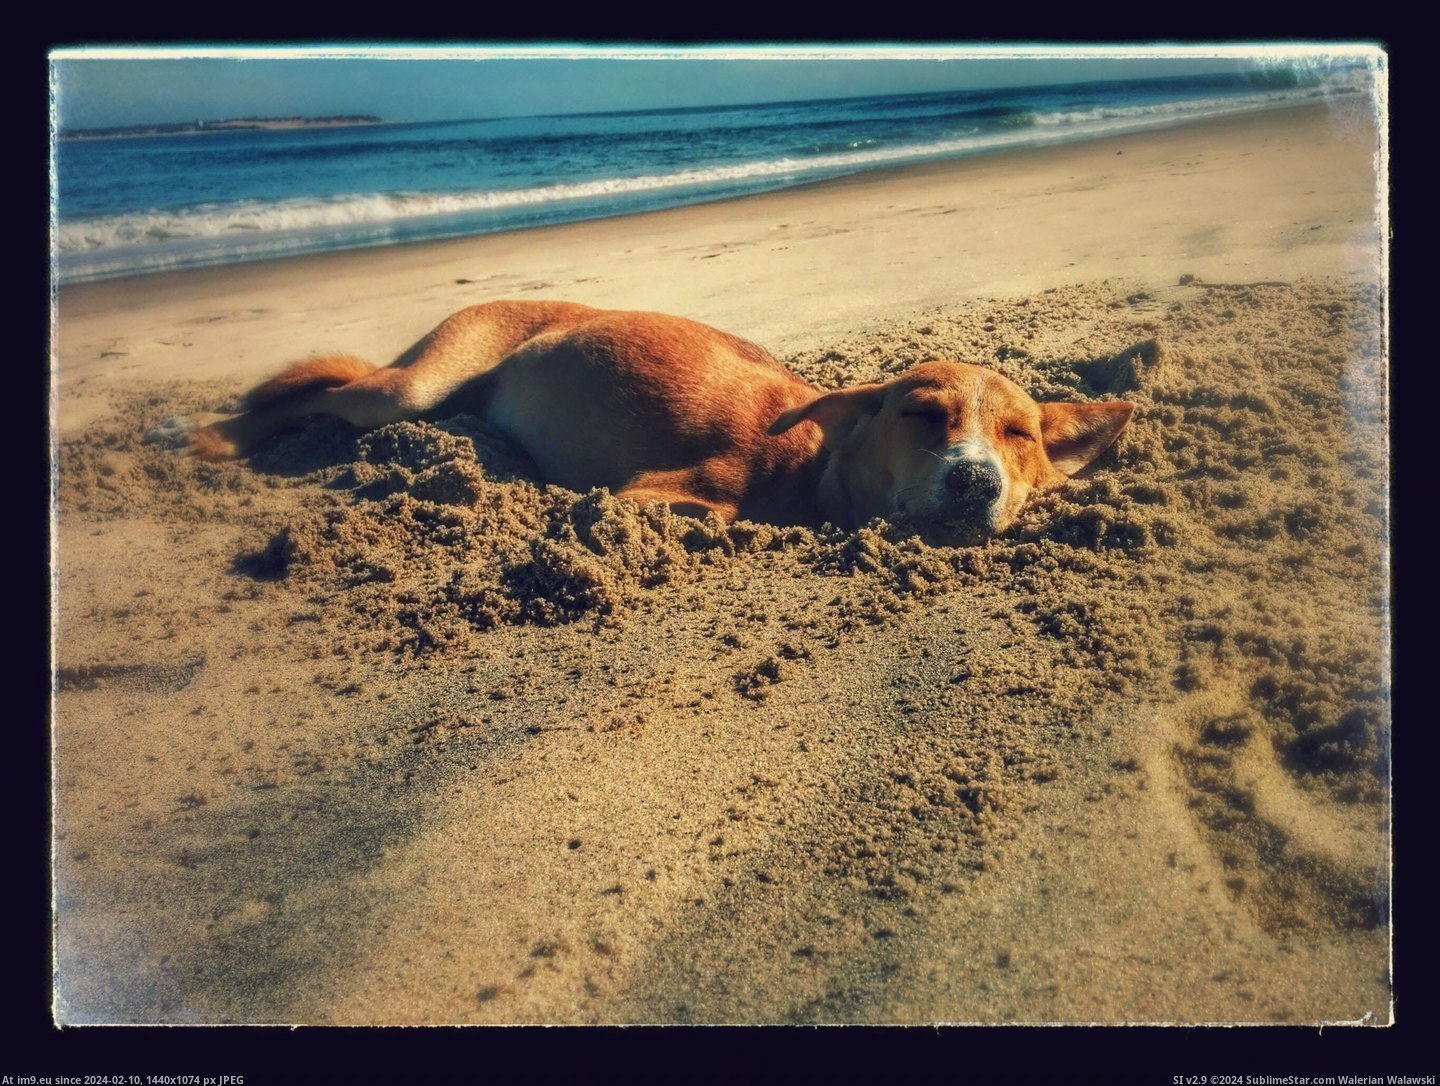 #Guy #Beach #Hole #Lanka #Sri #Dug #Sitting #Sleep #Visited [Aww] I visited Sri-Lanka recently, while sitting on the beach this guy came and dug a hole next to us, got in and went to sleep Pic. (Изображение из альбом My r/AWW favs))